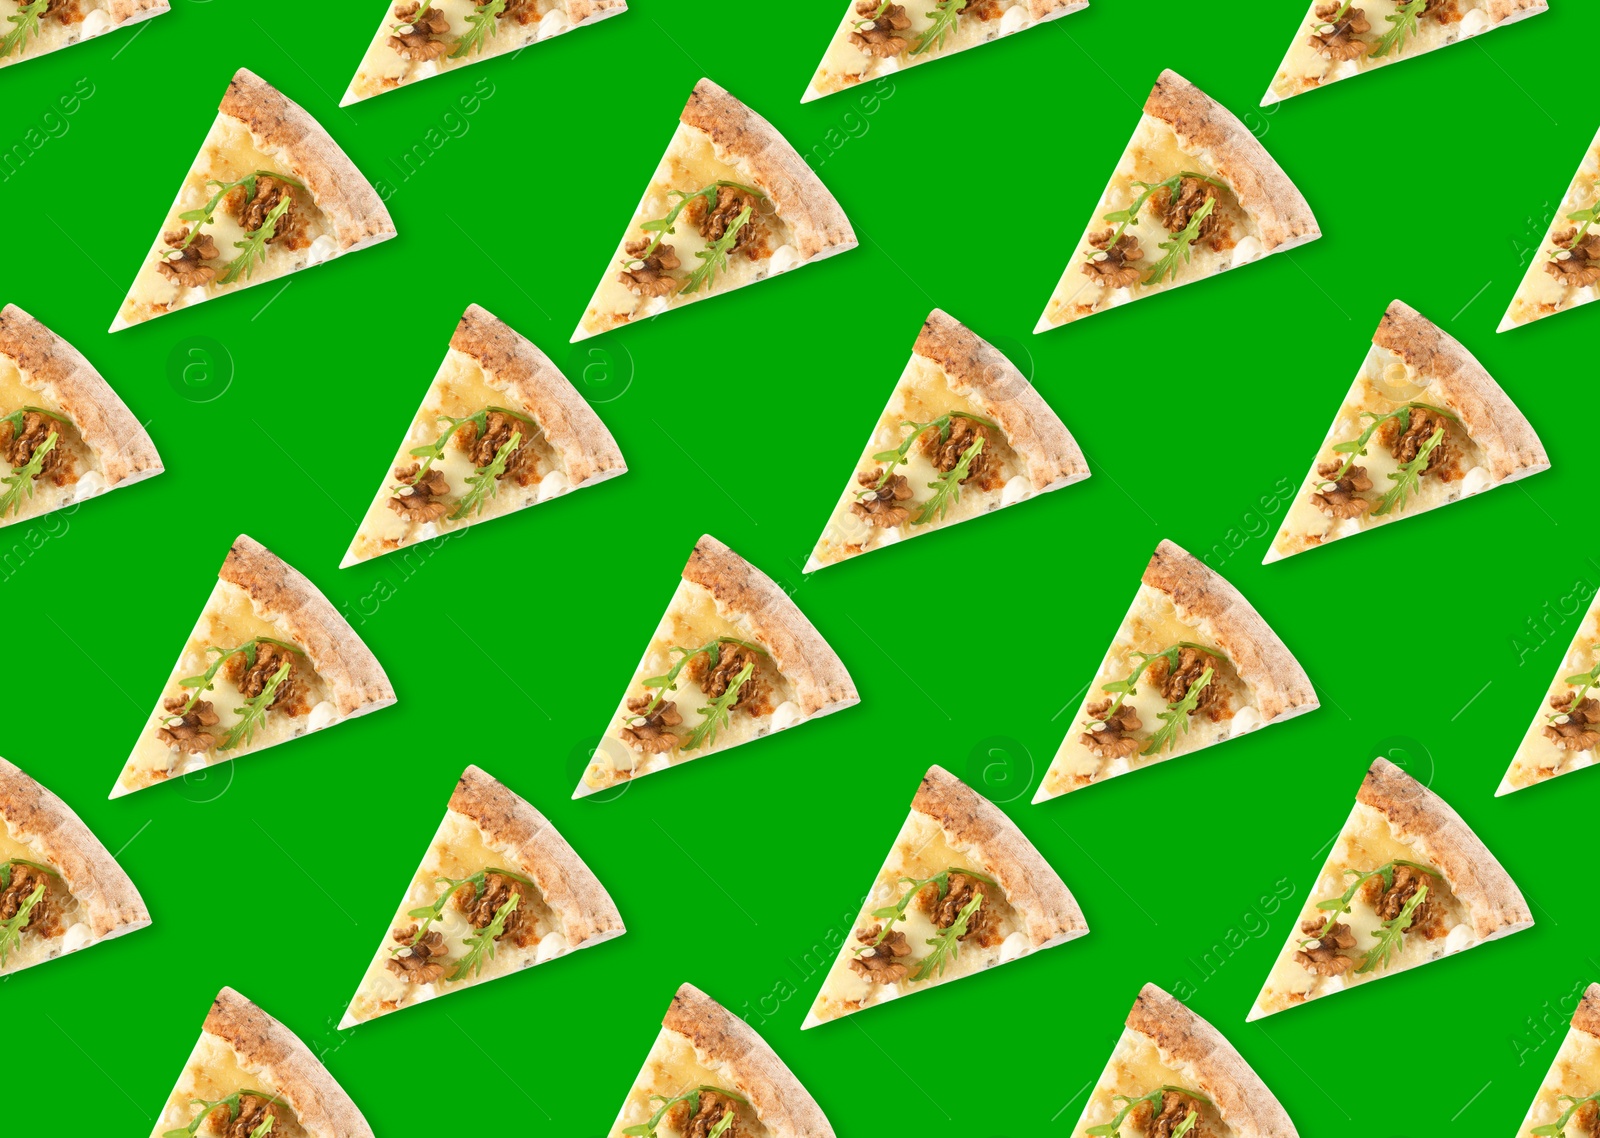 Image of Slices of delicious cheese pizzas on green background, flat lay. Seamless pattern design